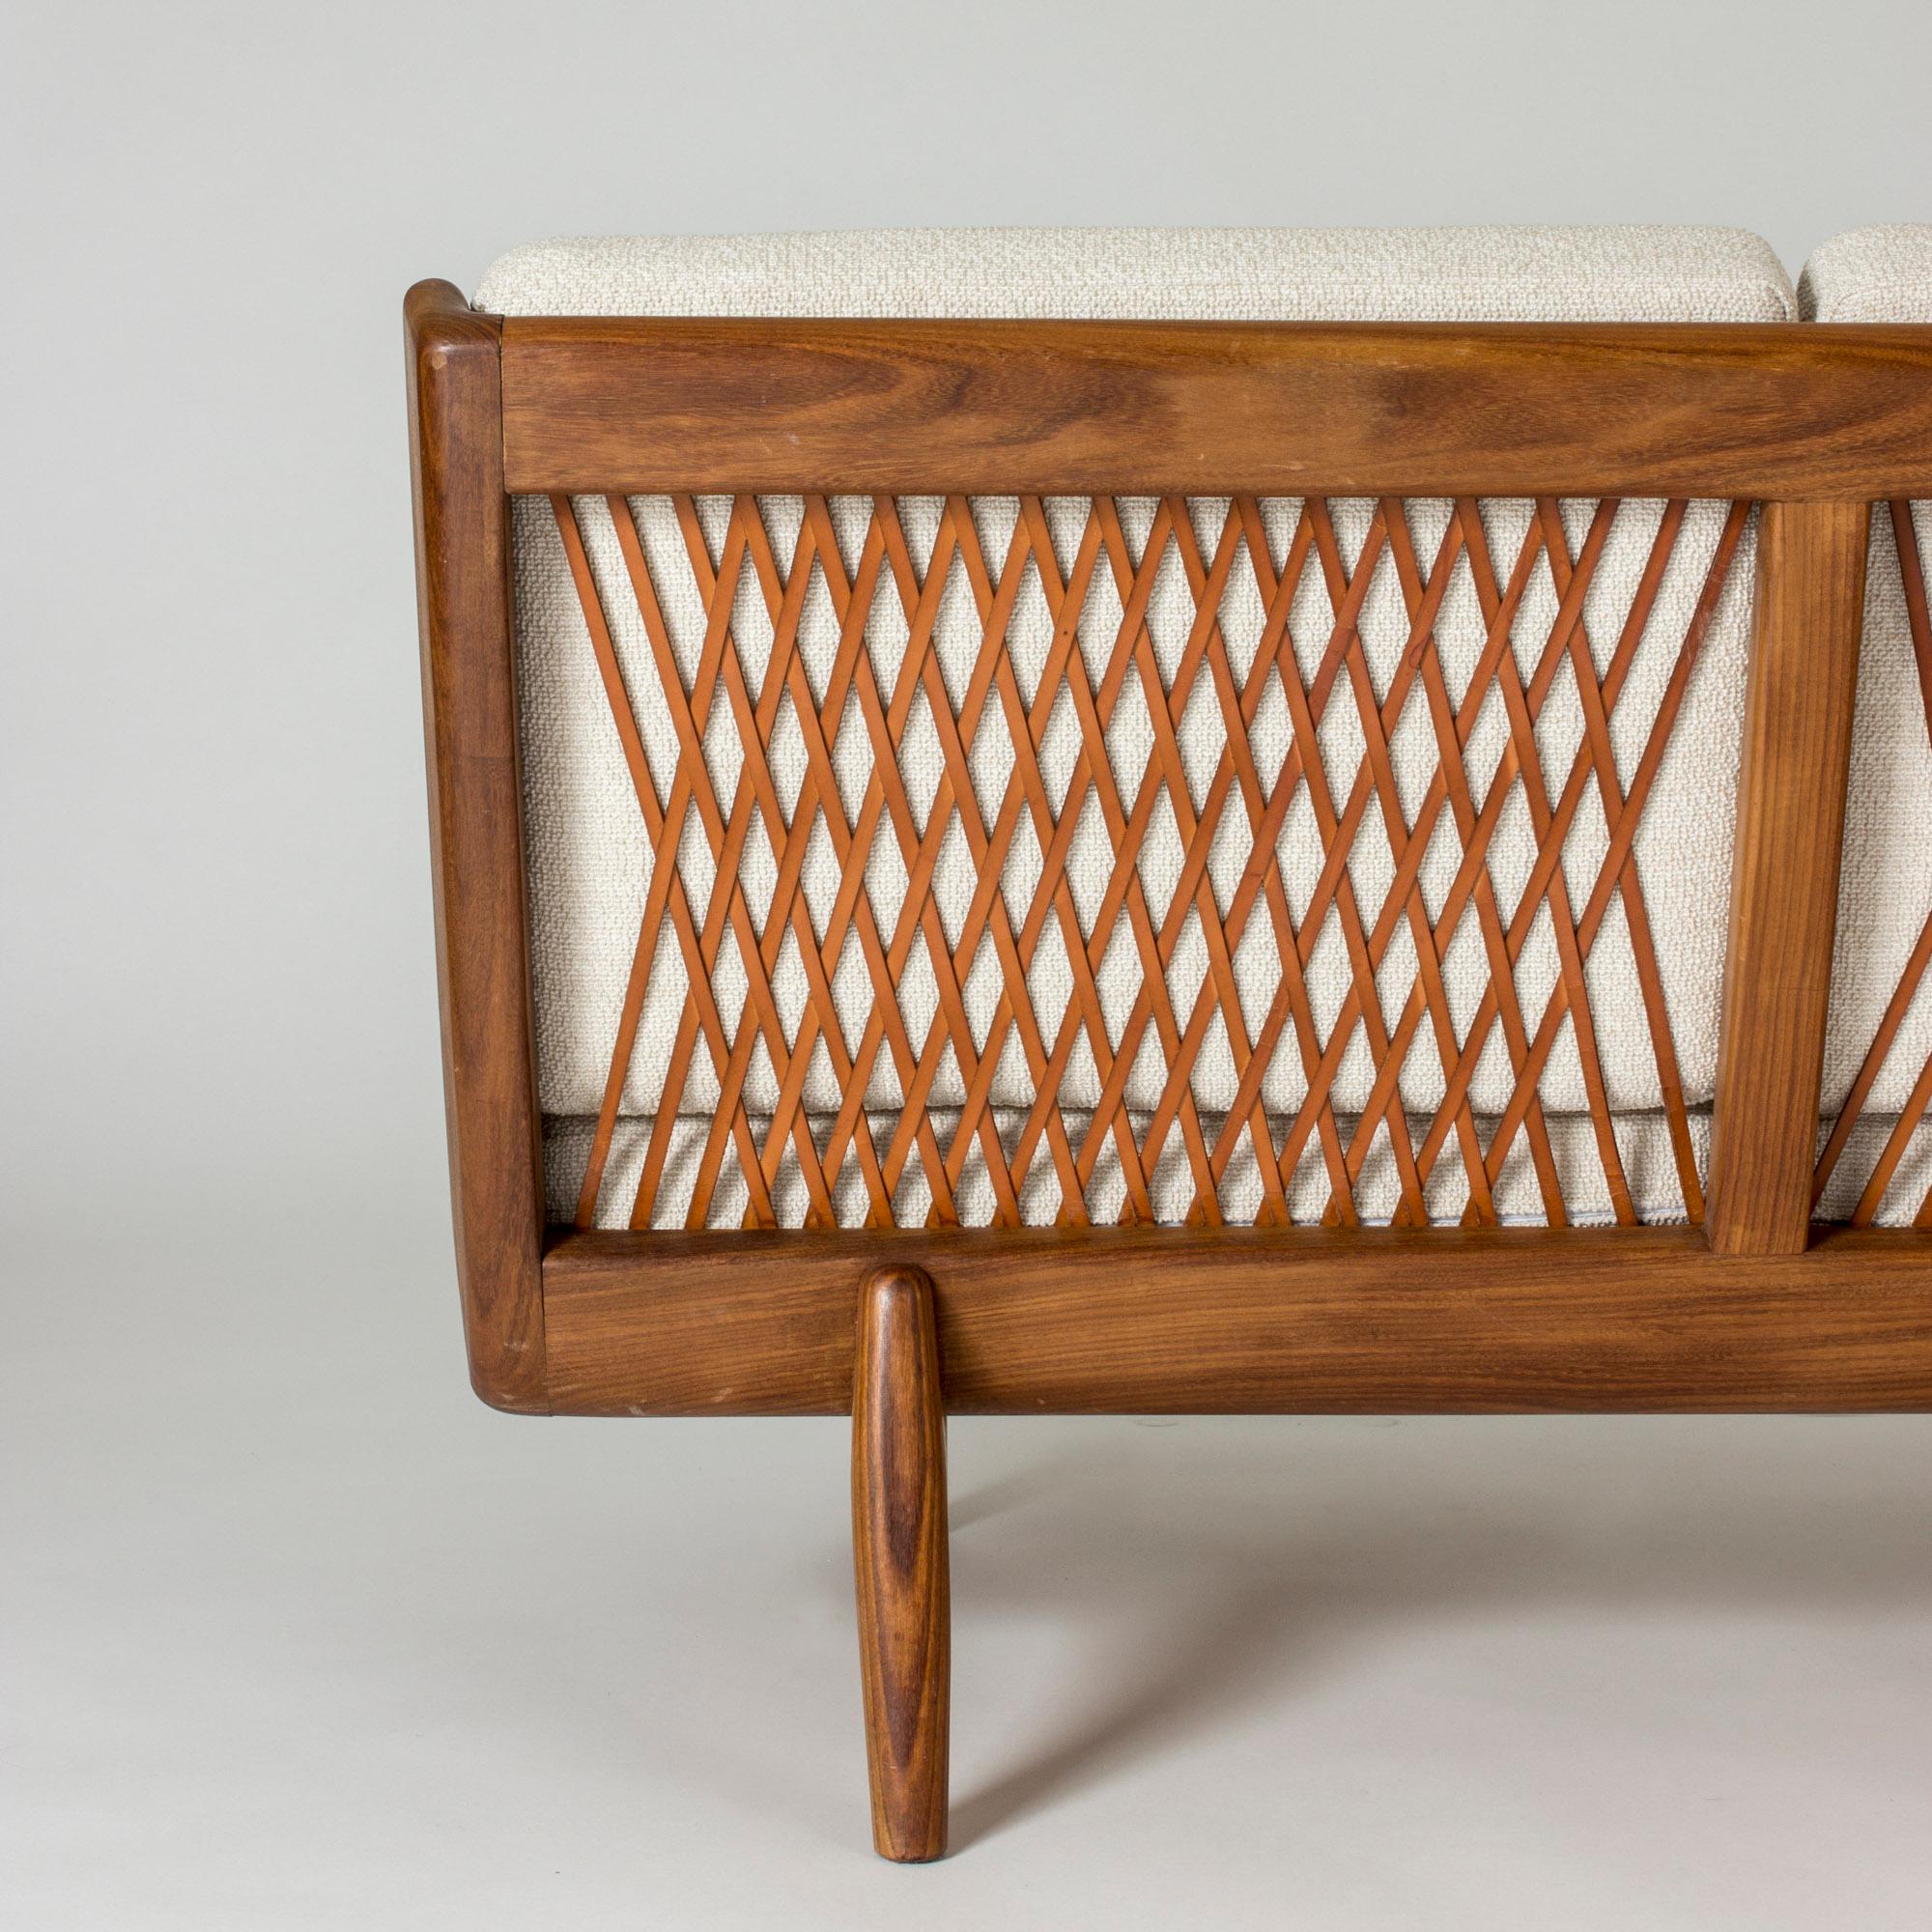 Walnut Sofa with Leather Webbing by Gustaf Hiort Af Ornäs, Finland, 1950s For Sale 2